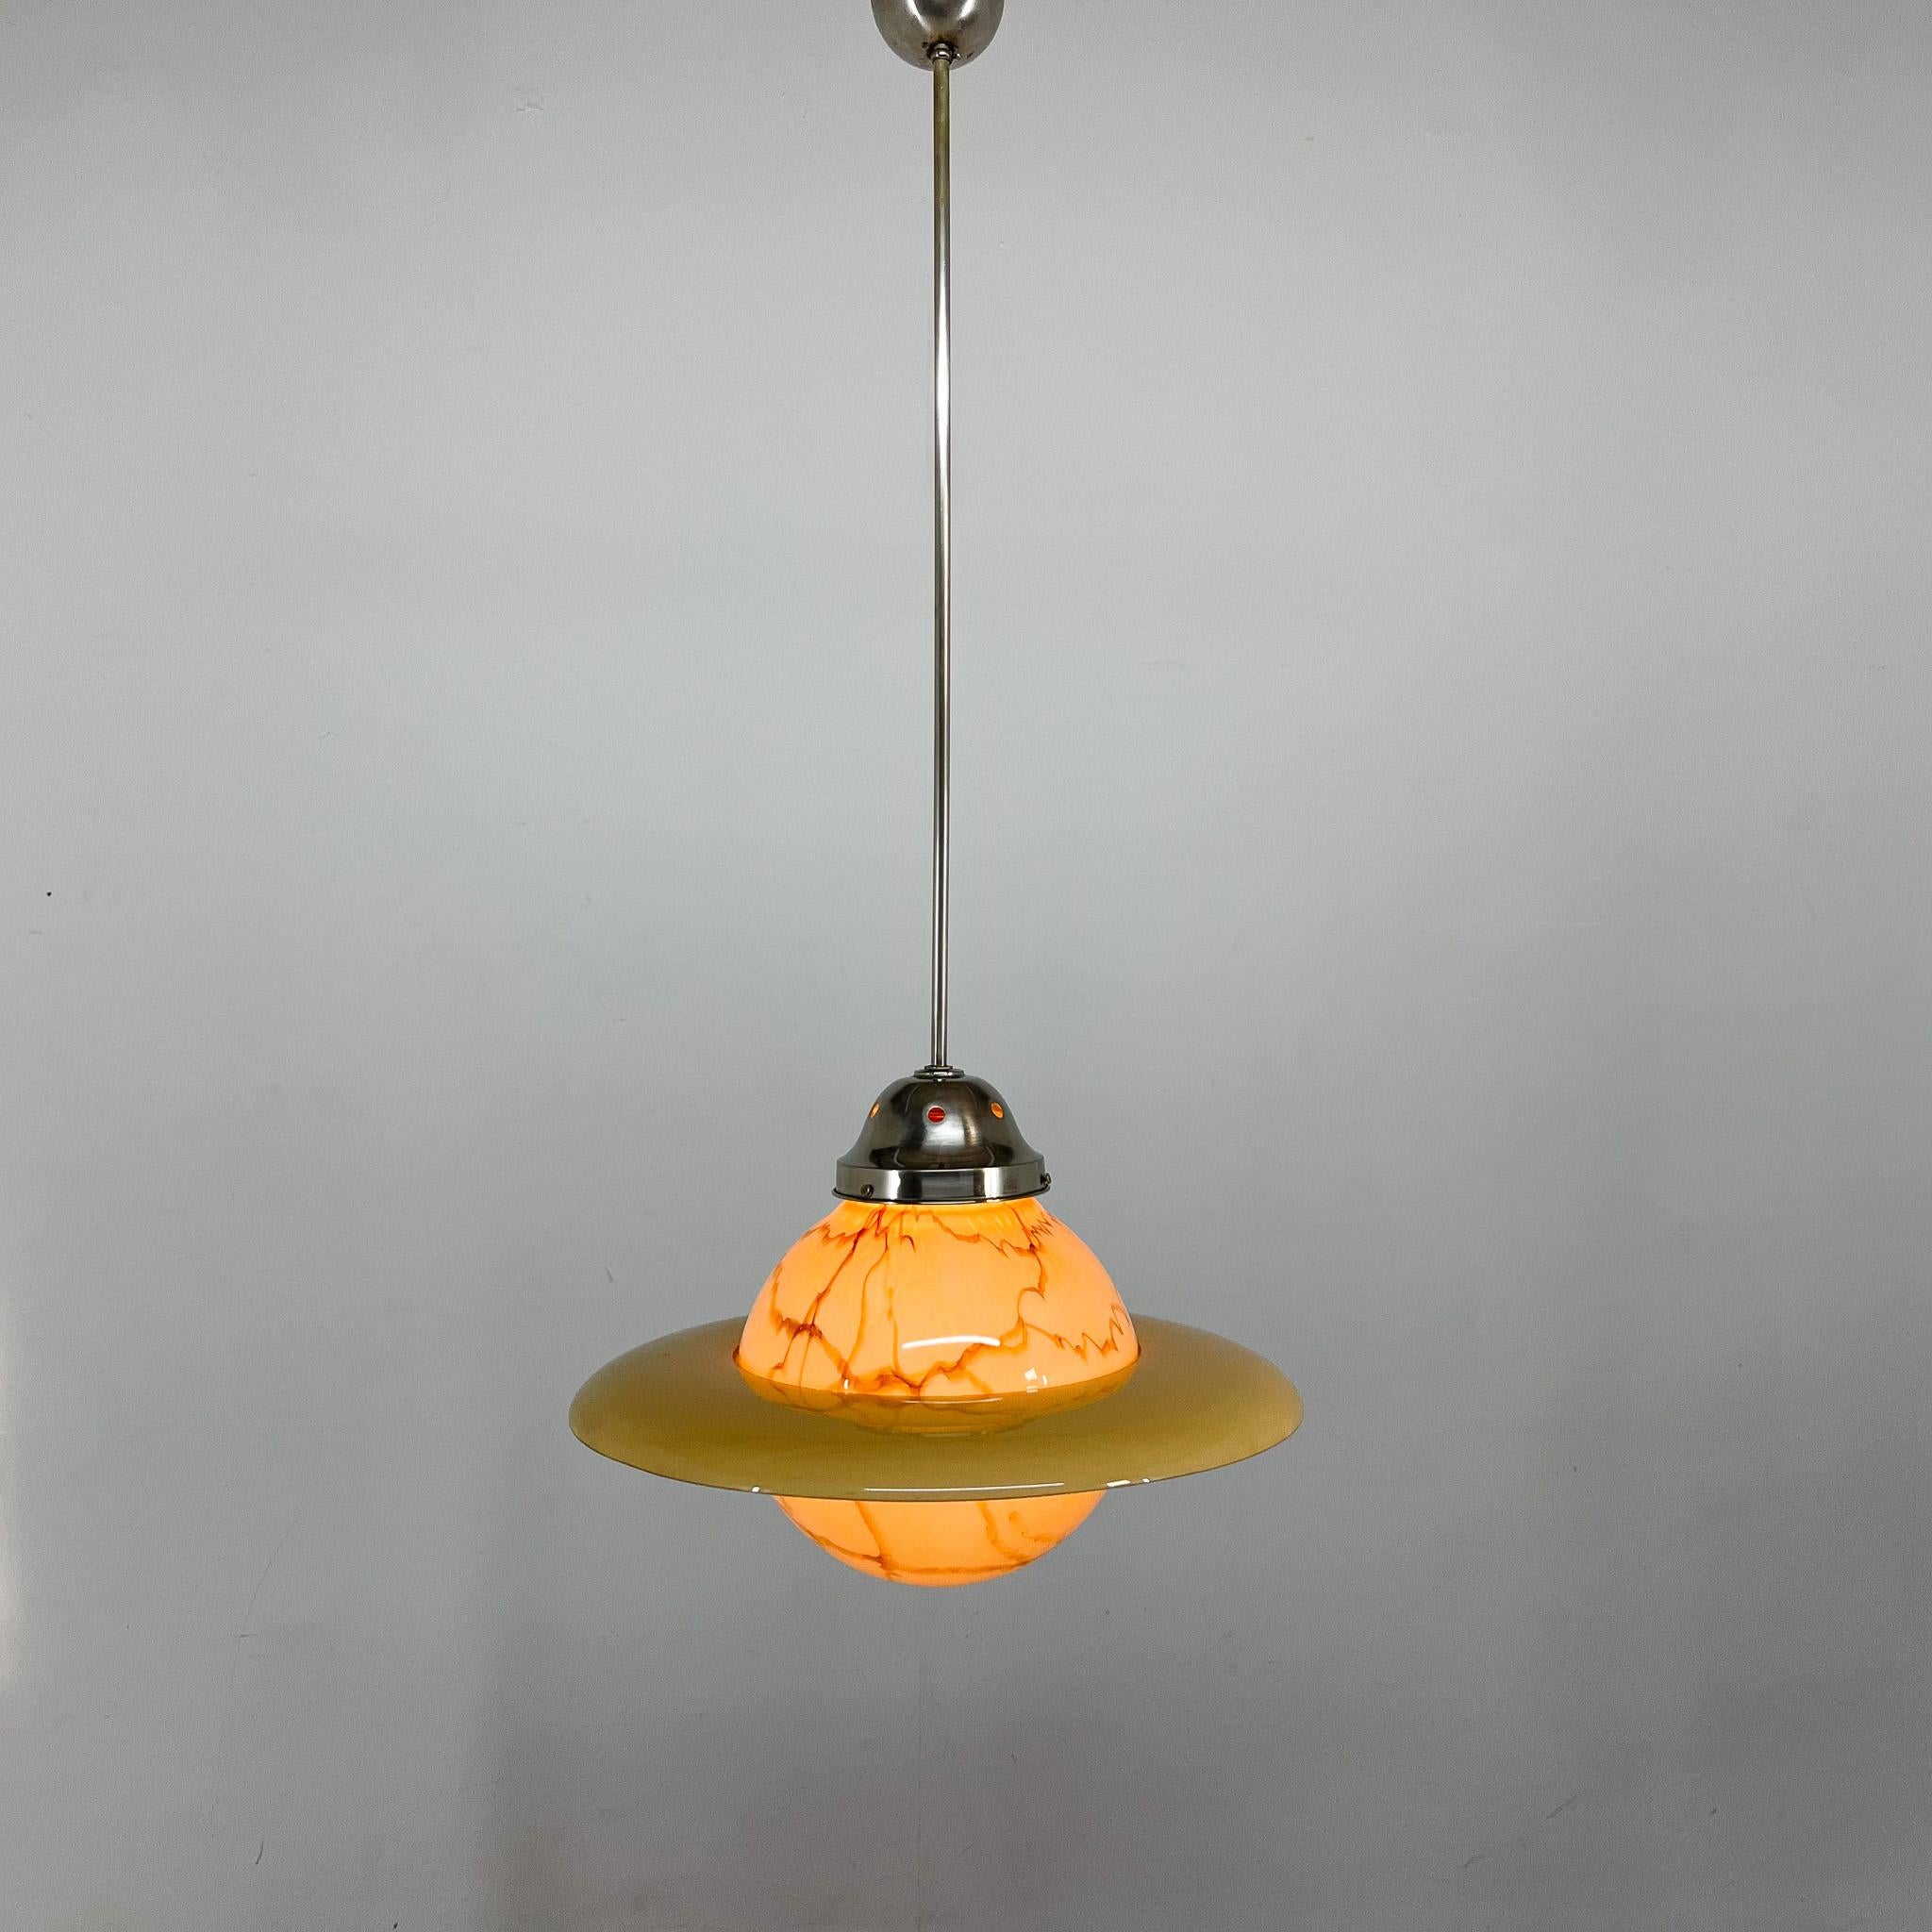 Art Deco marble glass pendant chandelier with chrome-plated rod. Around the shade is a glass circle and the pendant strongly resembles Saturn. Bulb: 1 x E25-E27.